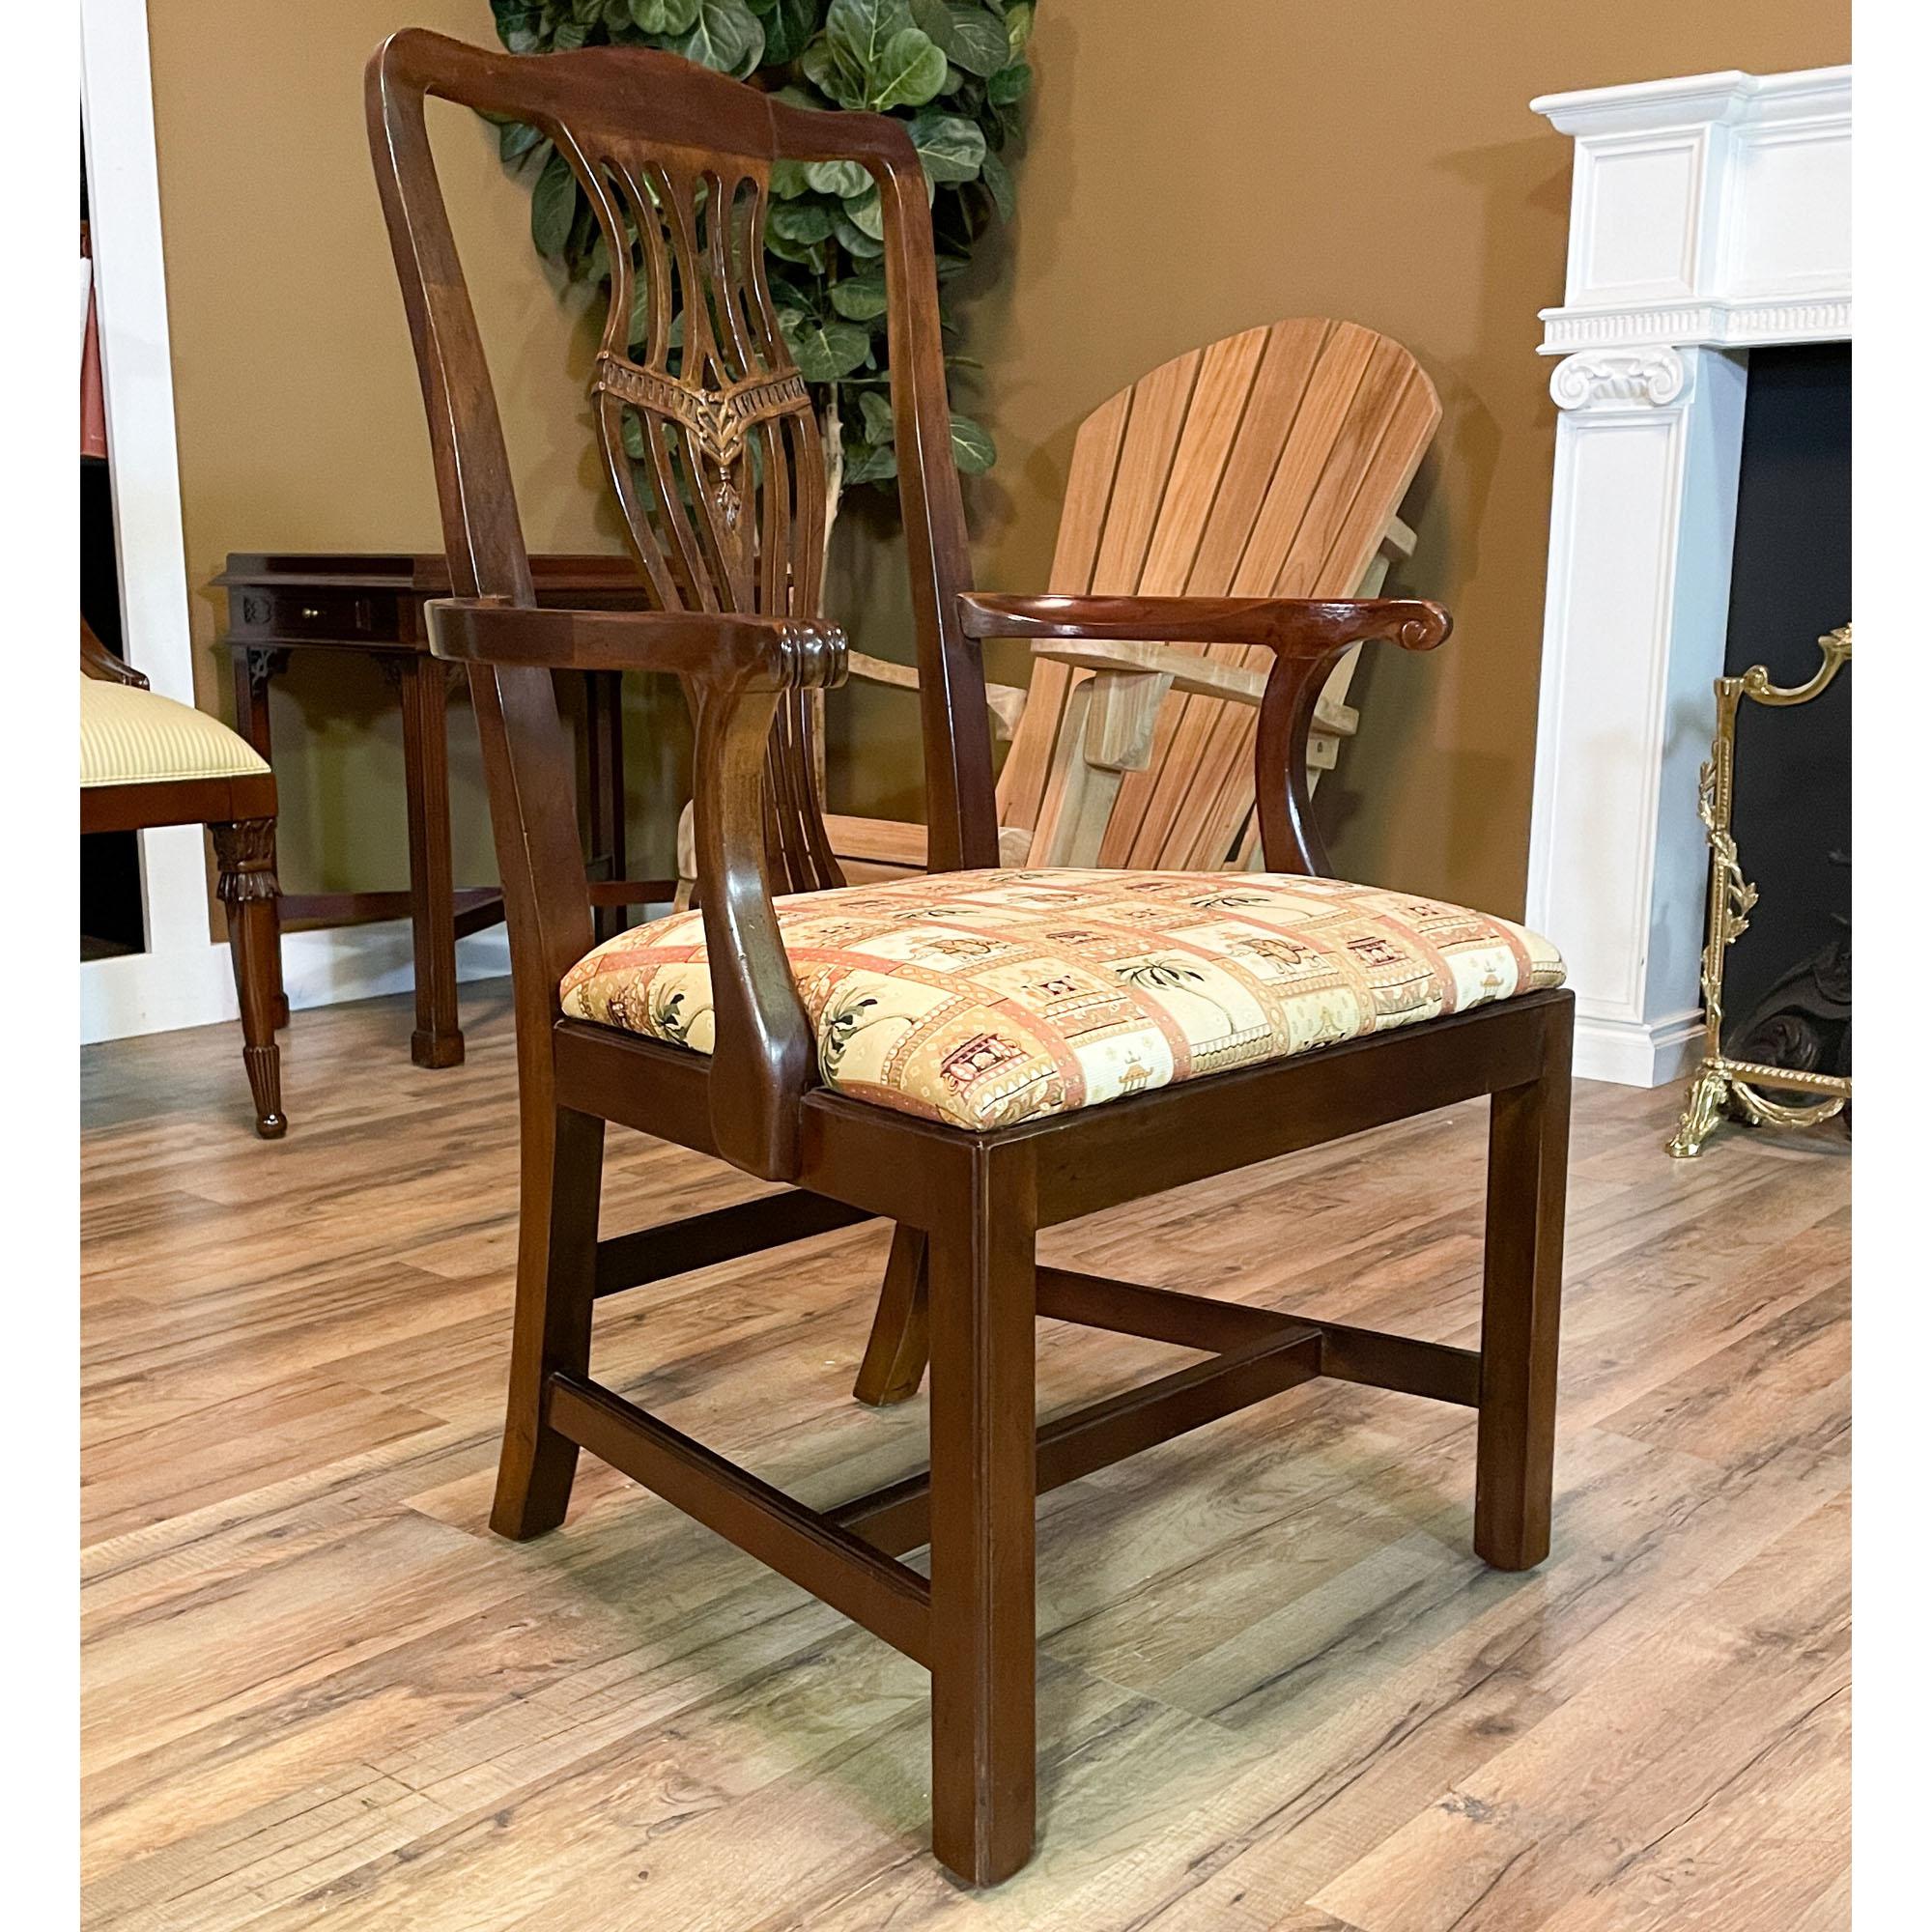 Henredon Set of 6 Vintage Chairs In Good Condition For Sale In Annville, PA